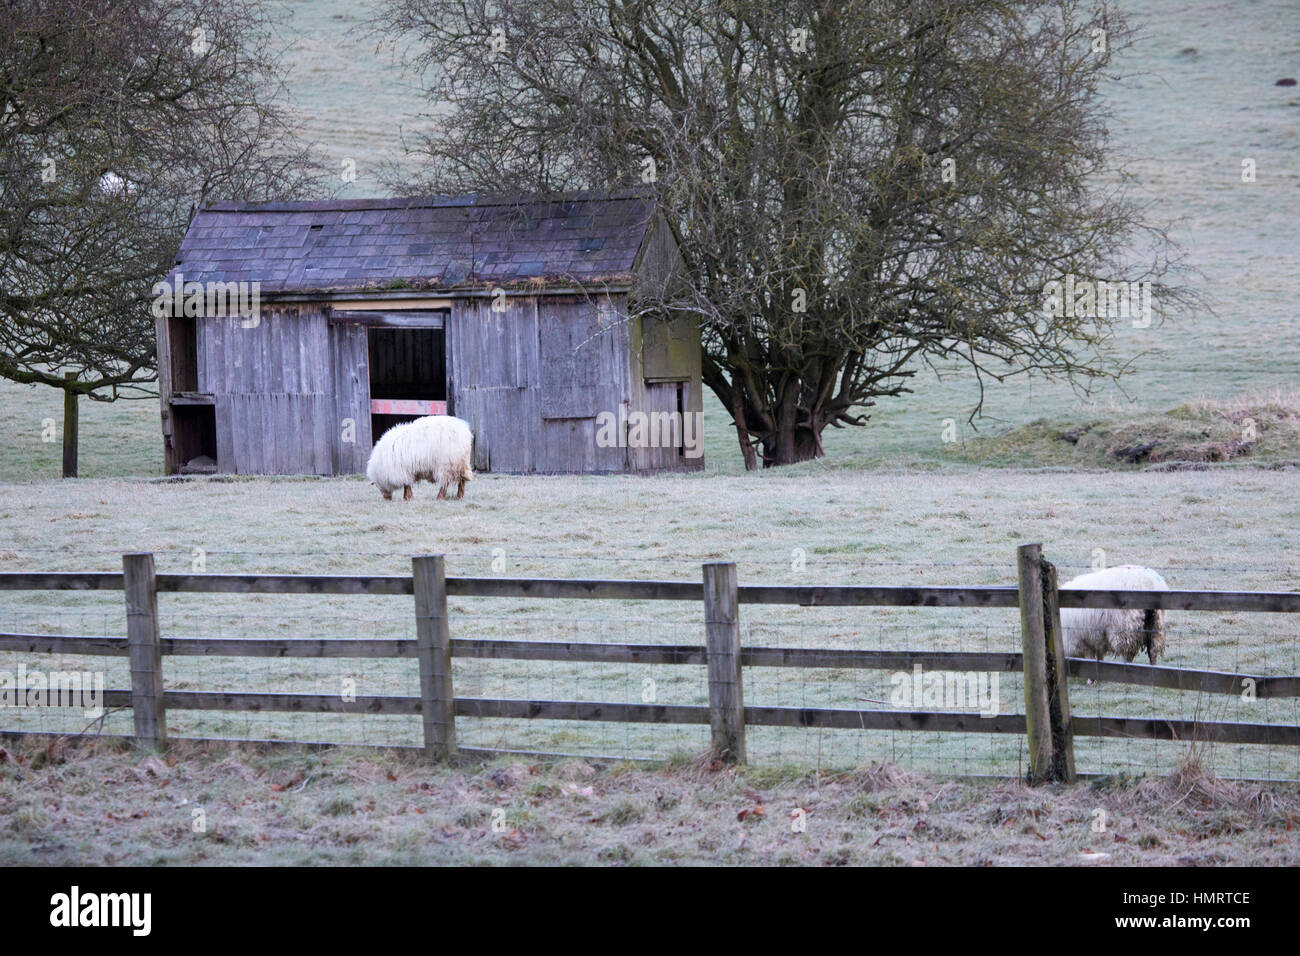 Sheep in a freezing field grazing with an old wooden farm shed in the back ground Stock Photo